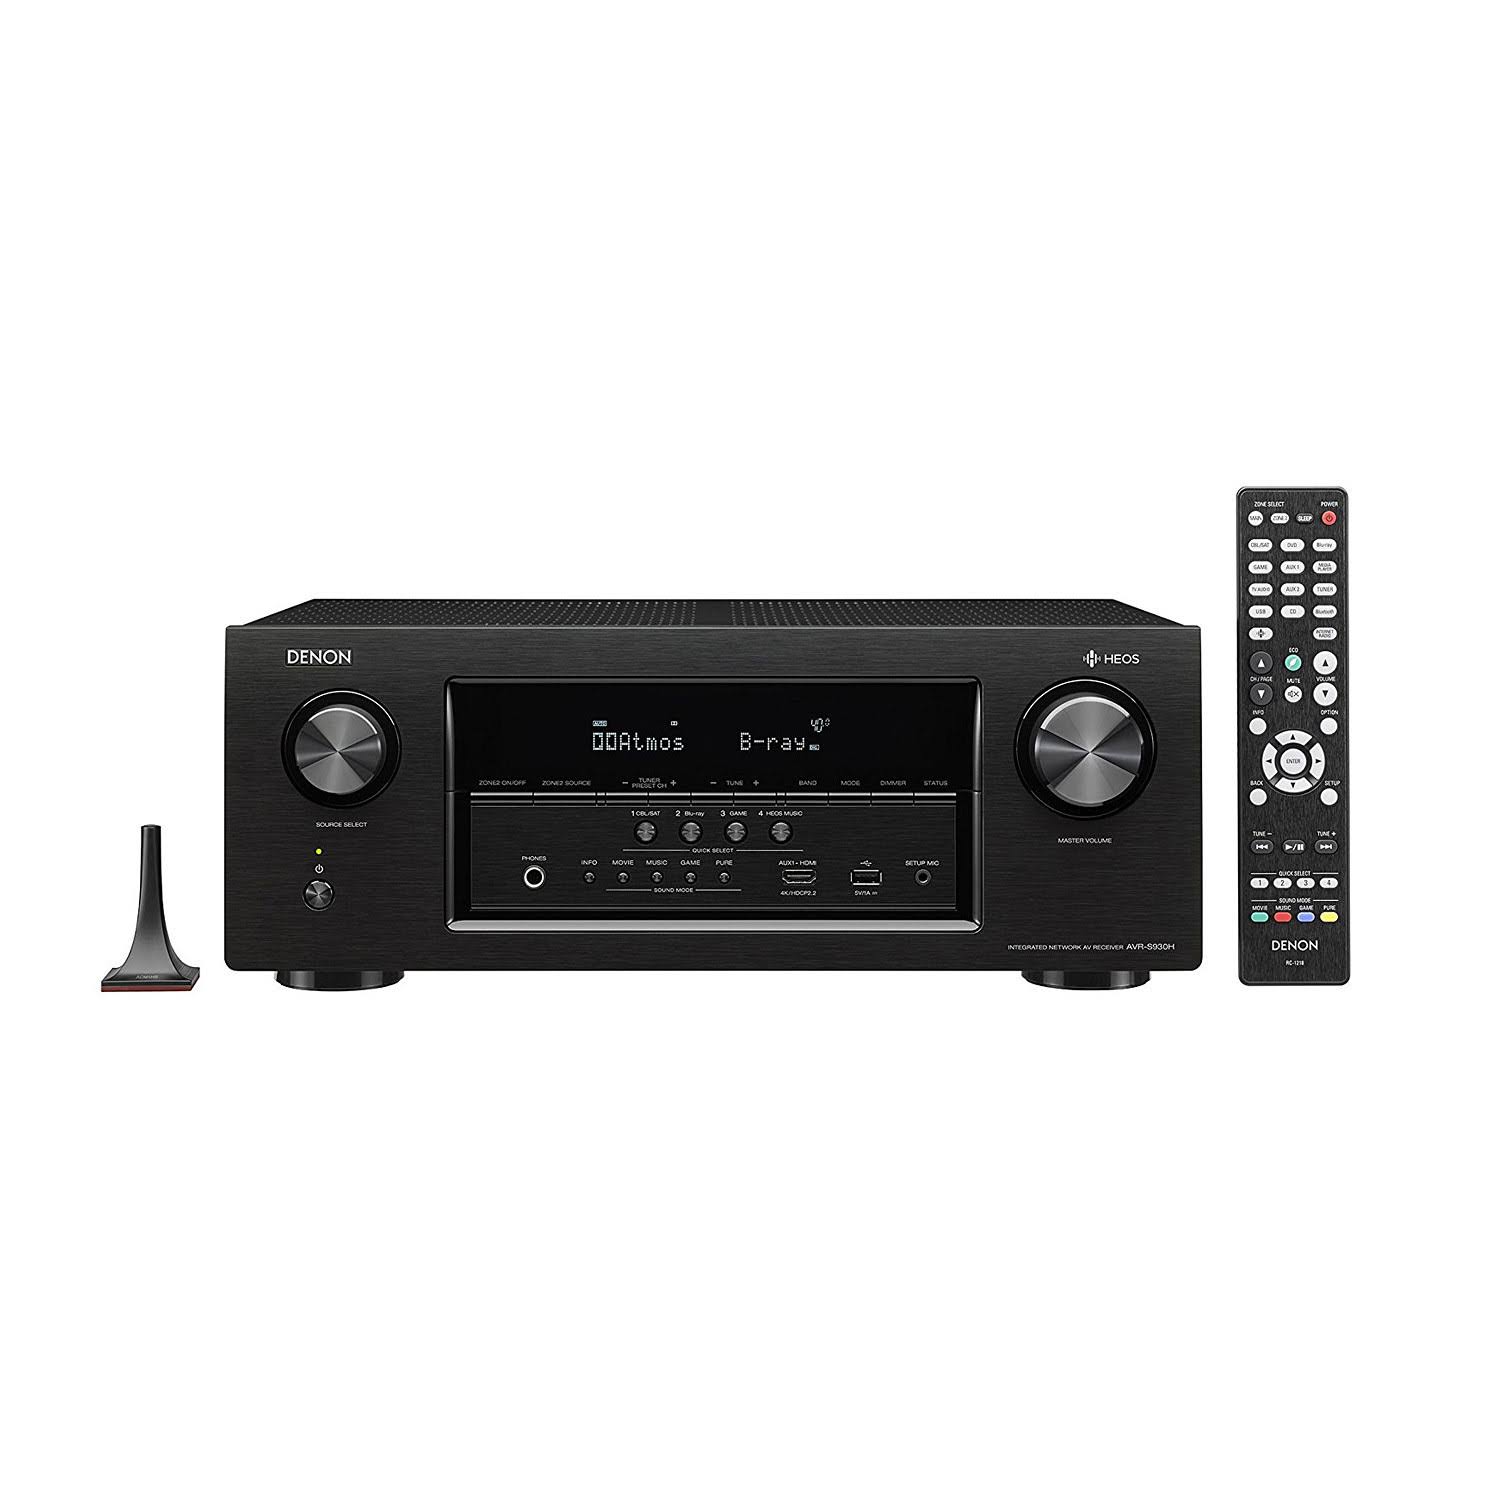 Denon AVRS930H 7.2 Channel AV Receiver with Built-in HEOS wireless technology